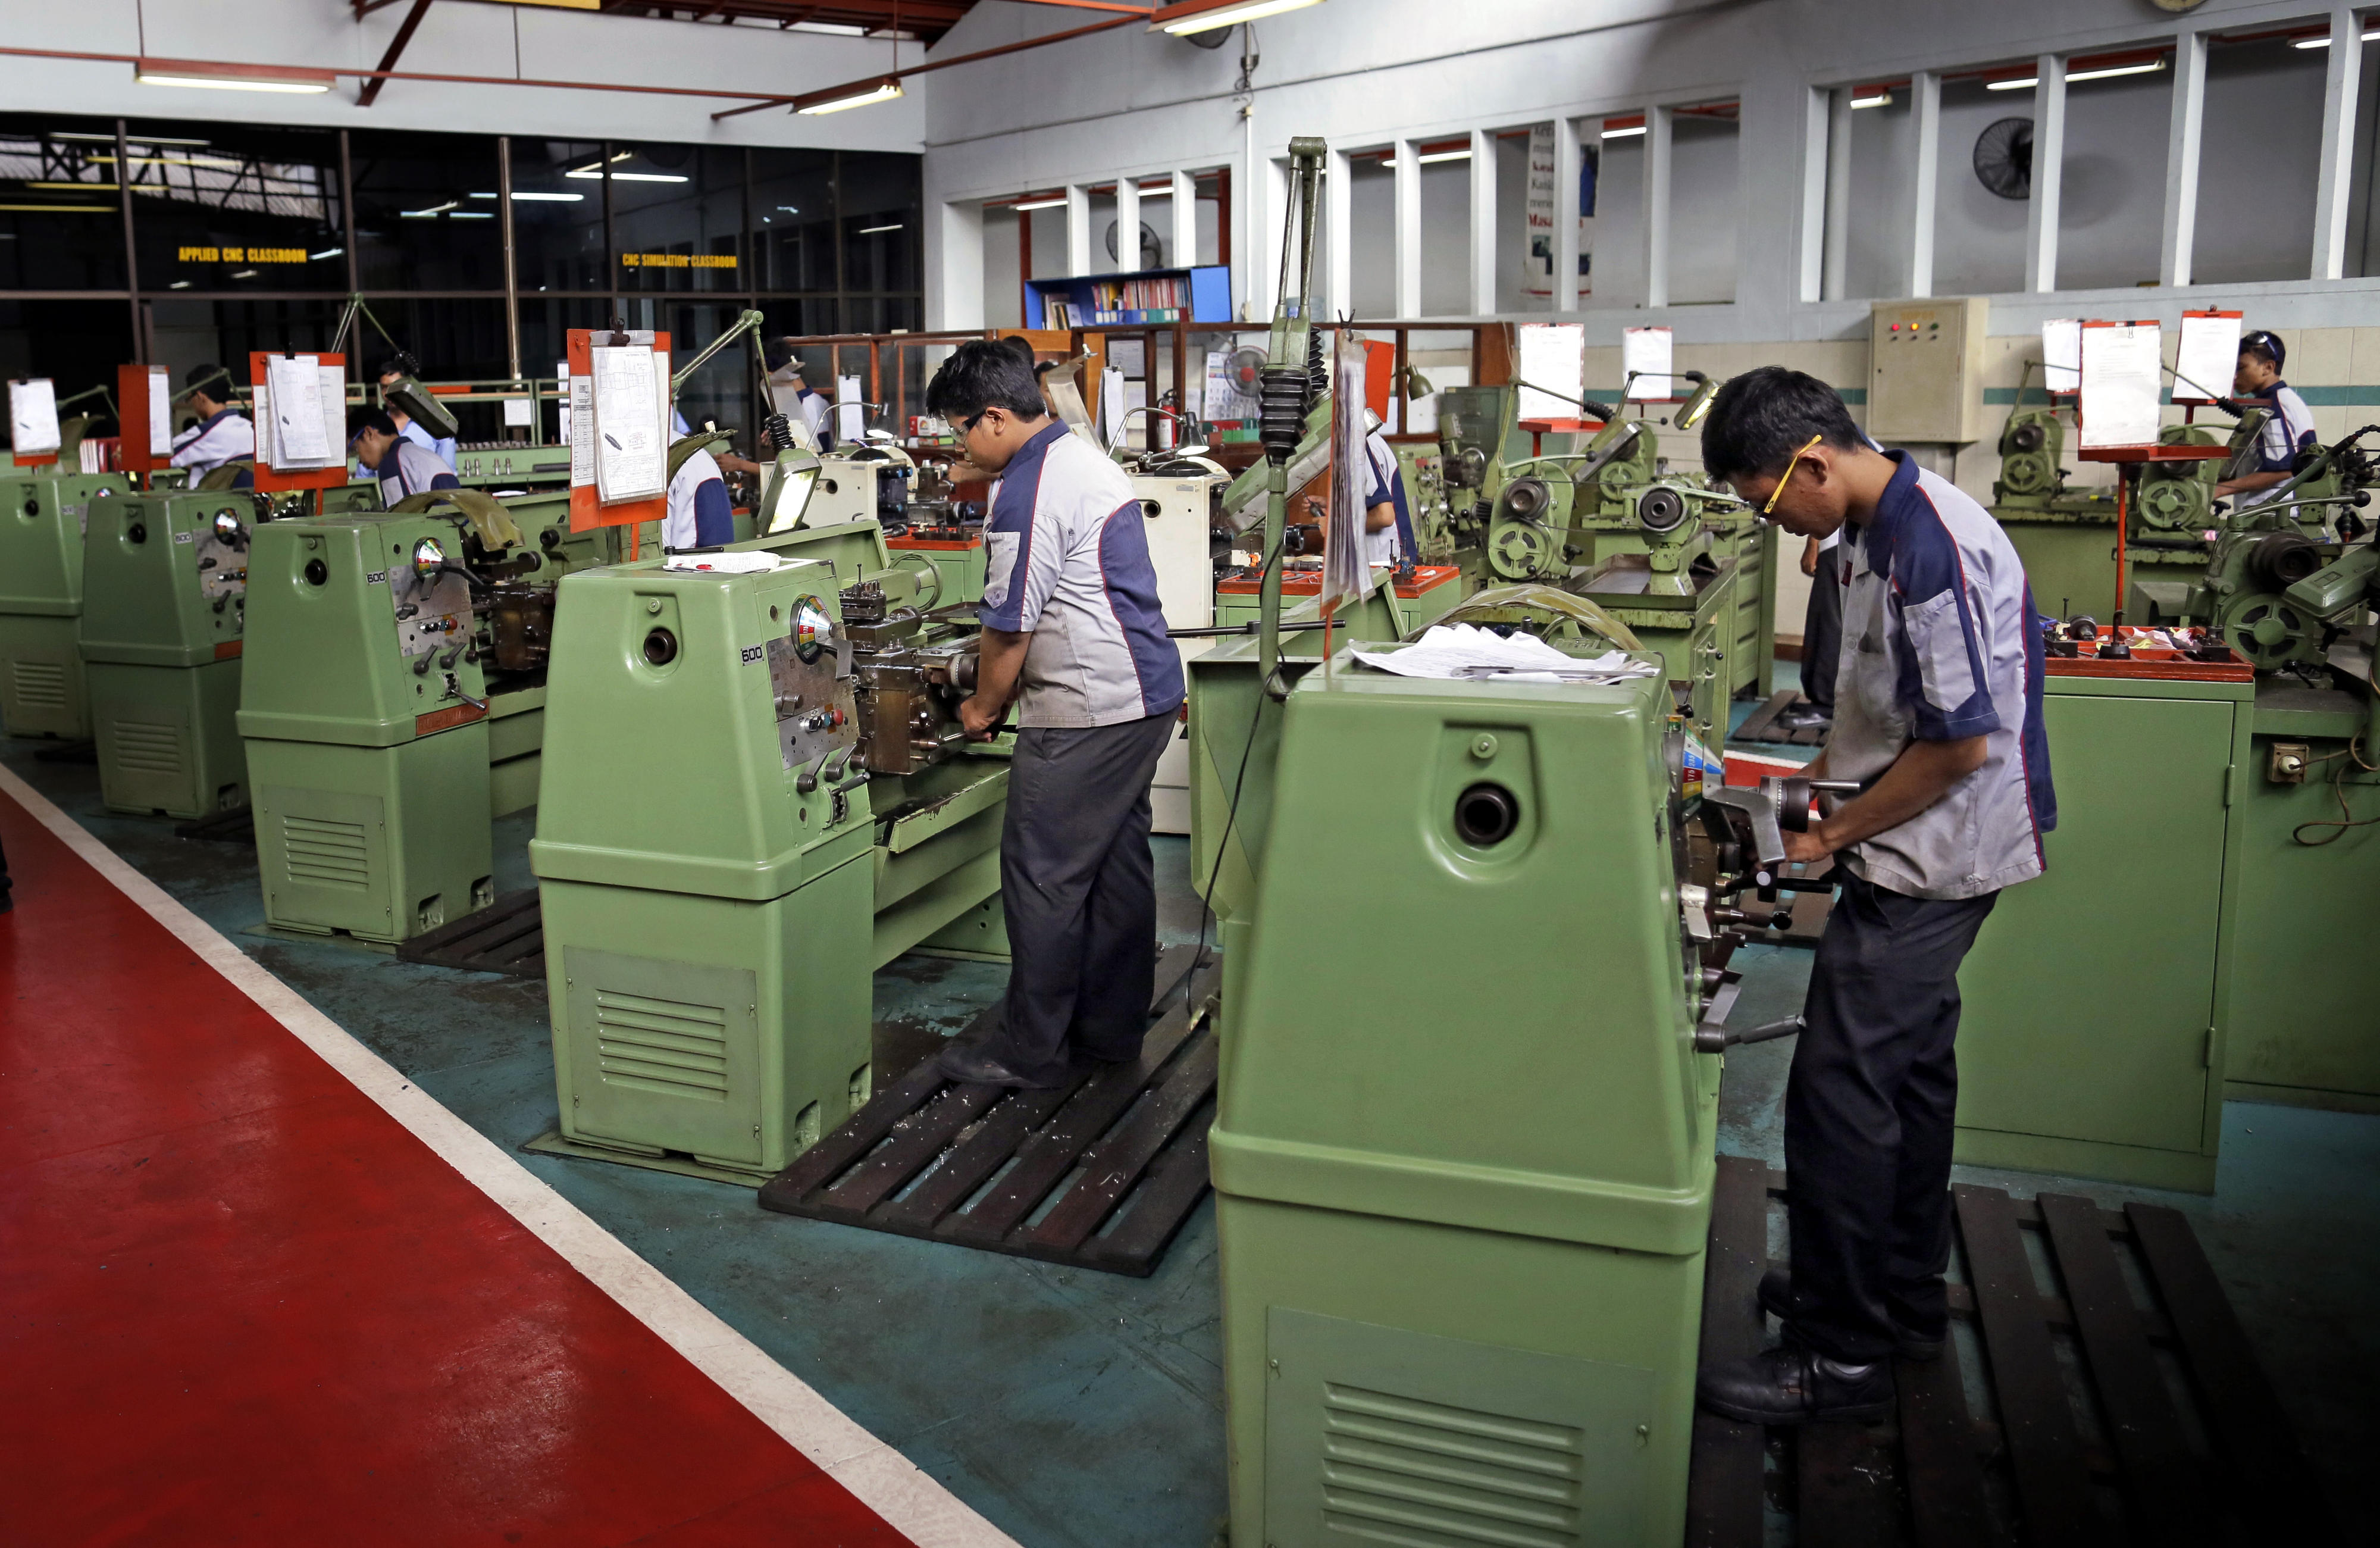 Vocational school for industrial mechanics ATMI in Solo in Indonesia. Around 450 pupils are trained here in various fields, such as welders, locksmiths and toolmakers.